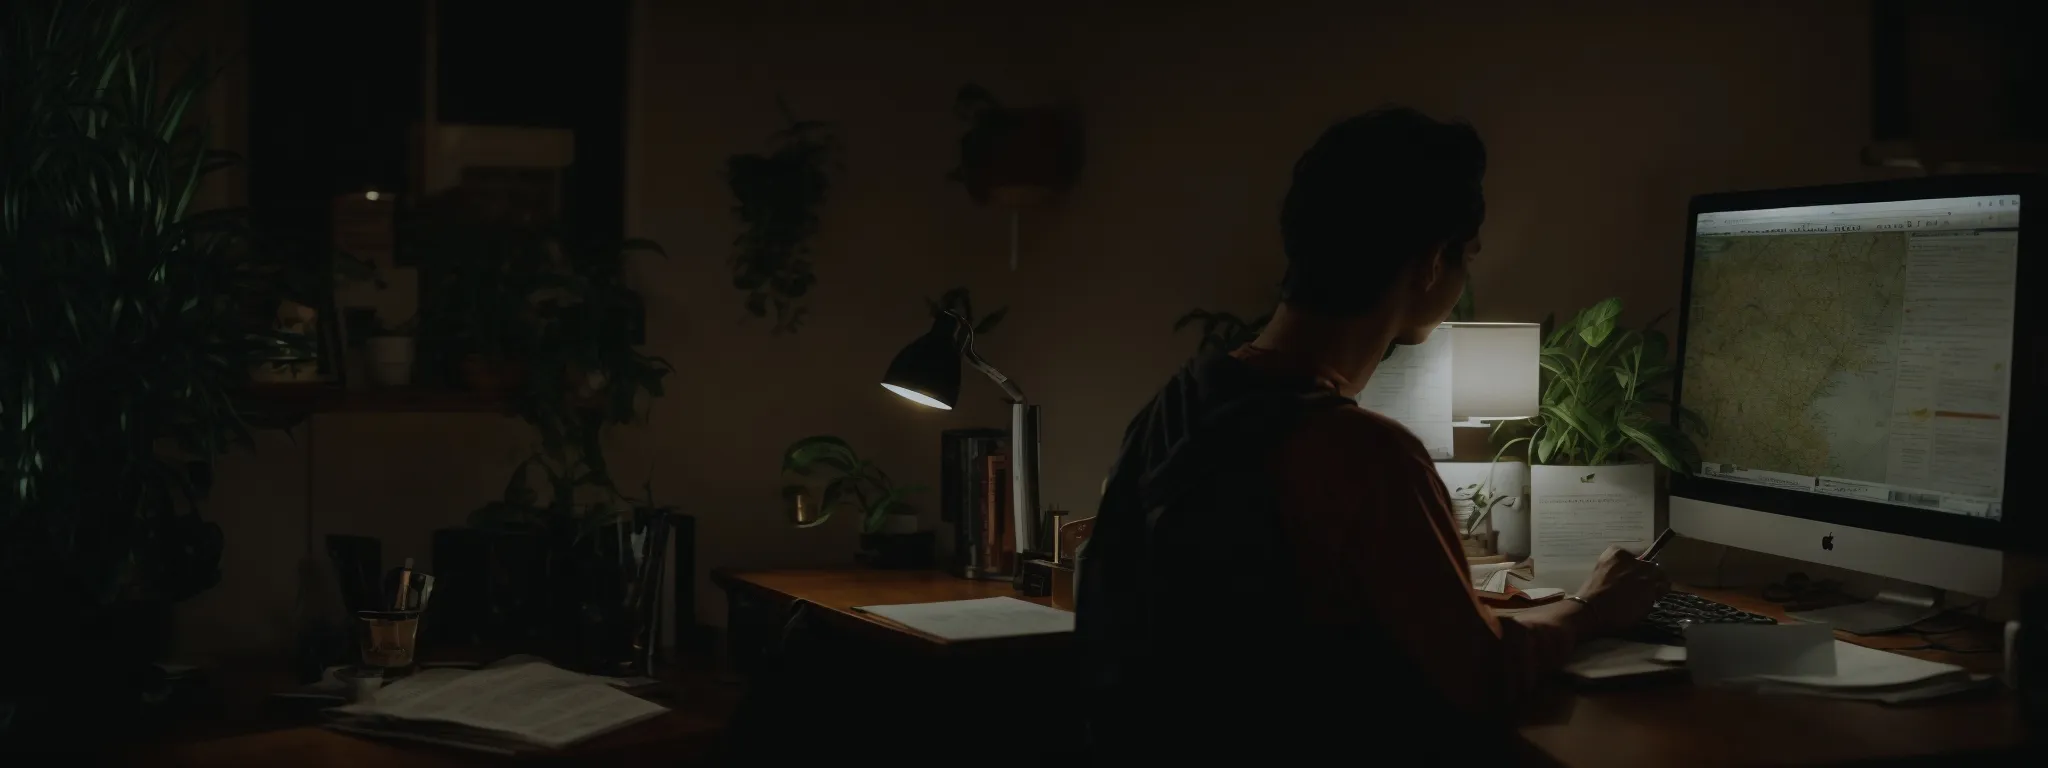 a person seated at a desk, absorbed in writing an eye-catching headline on a computer screen framed by a potted plant and a dimly lit lamp.